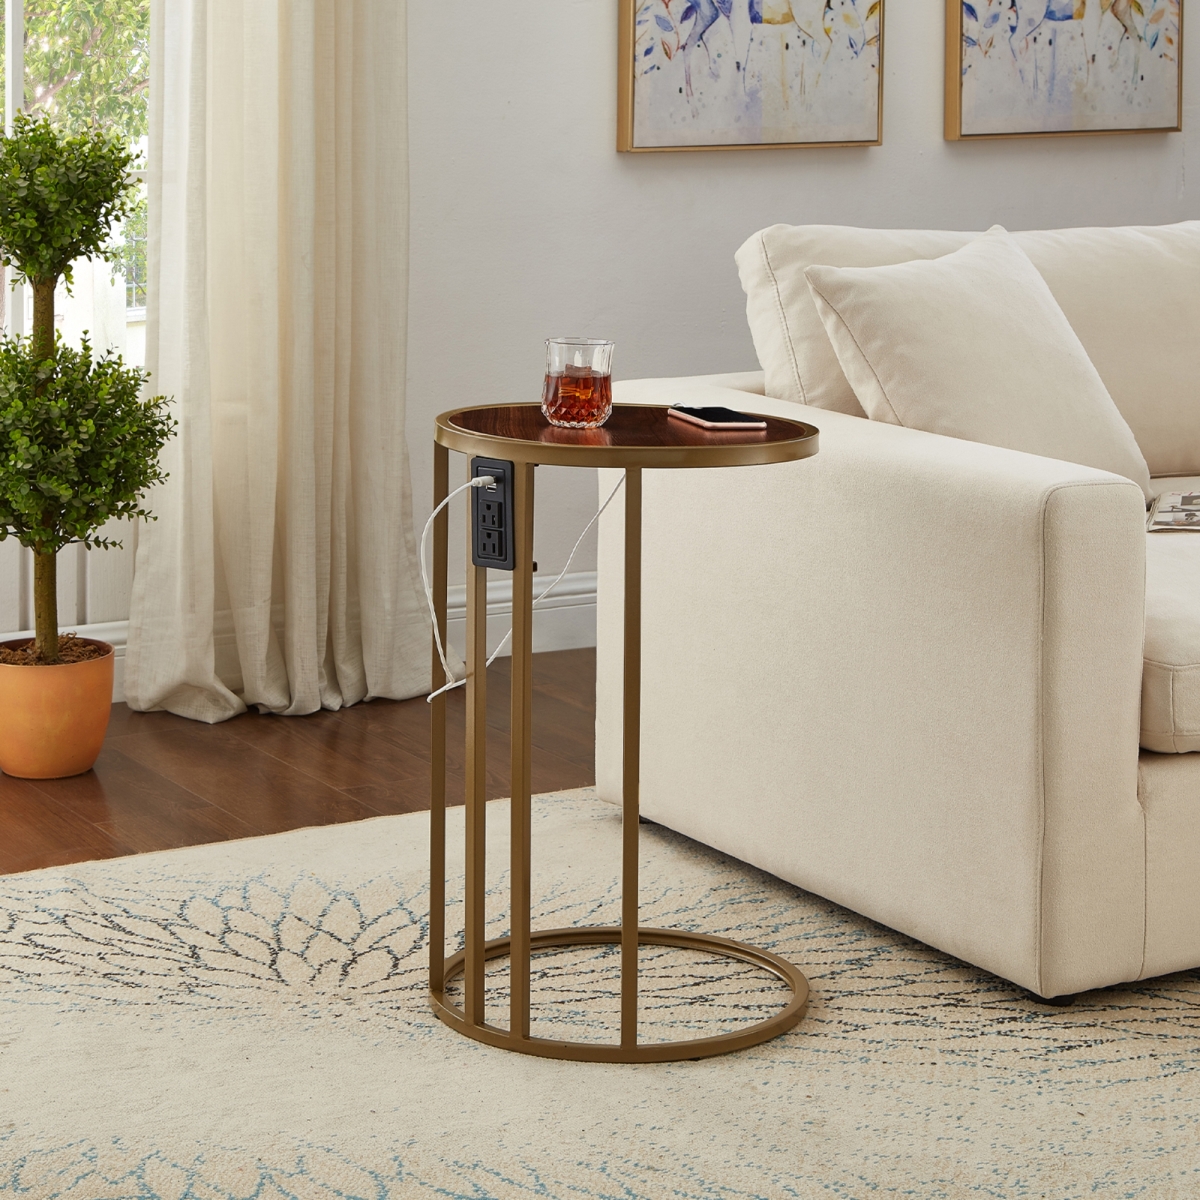 Let212-09wt-ue 15.75 X 15.75 X 25 In. Annabel End Table - 2 Usb Charging Ports 2 Outlets Power Plug, Walnut & Gold